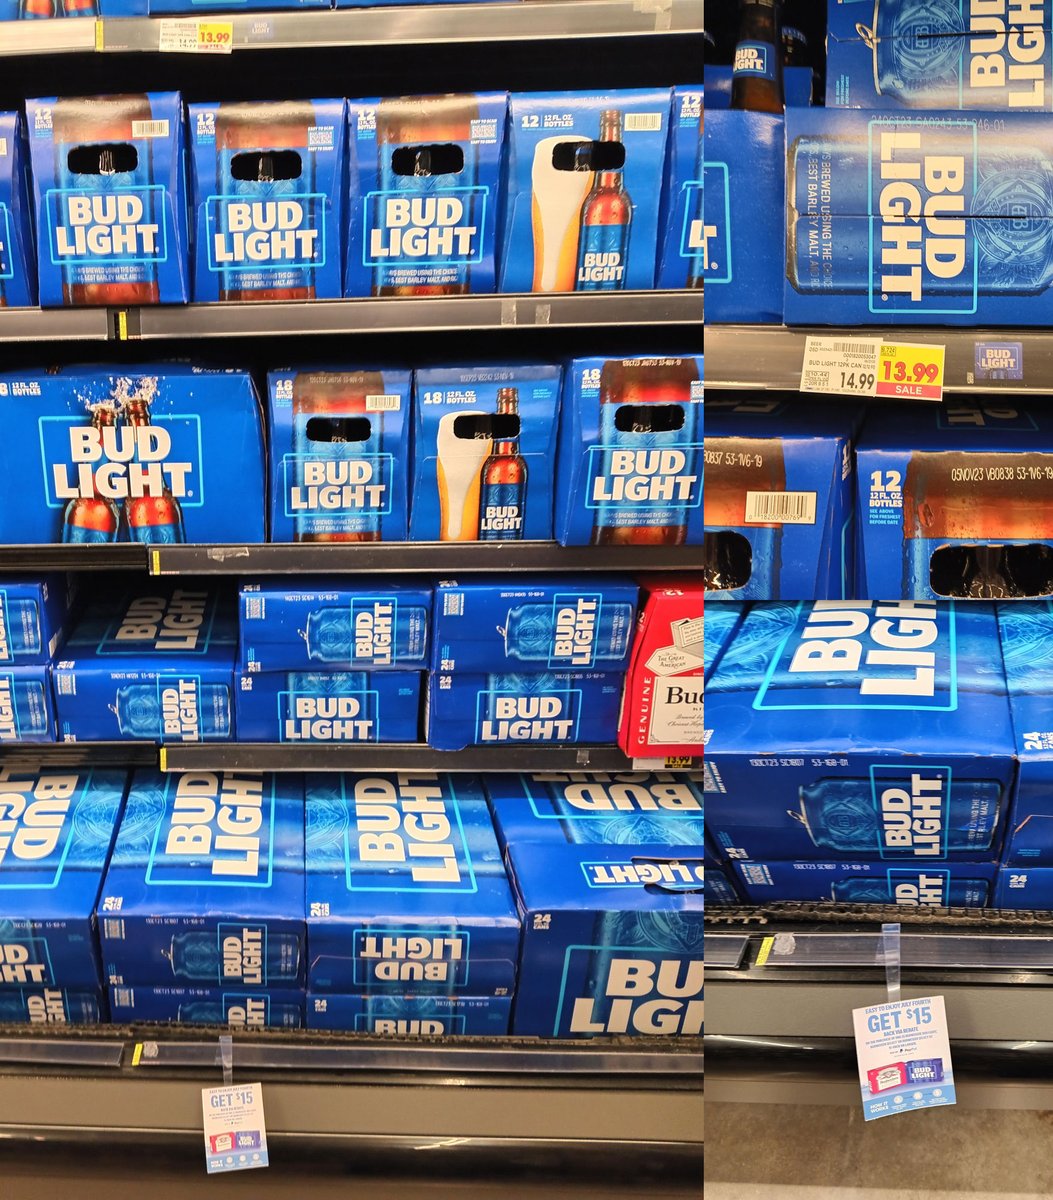 Apparently #BudLight sales r so bad you can now make money by purchasing. Sale $13.99 with a $15 rebate. 🍻😆